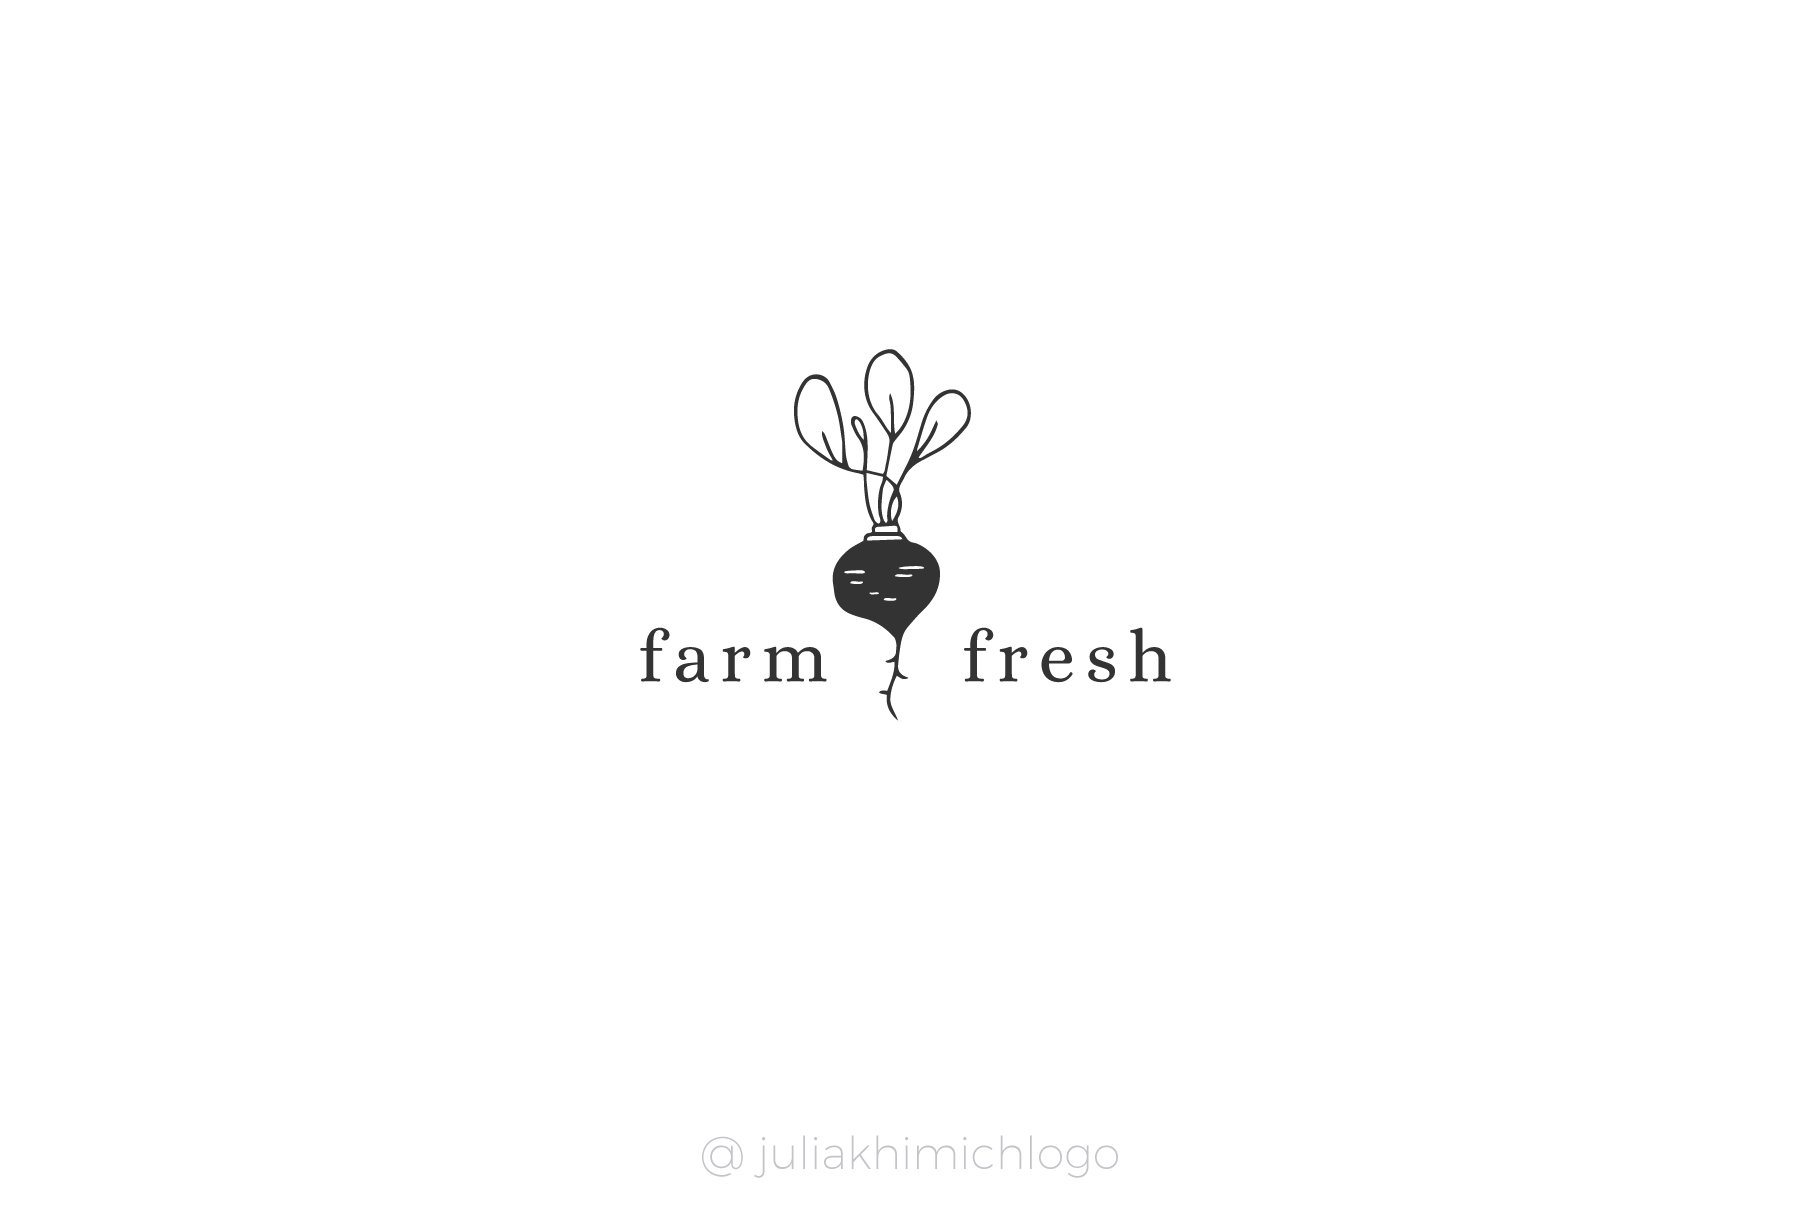 Simple and understandable logo for farm fresh .